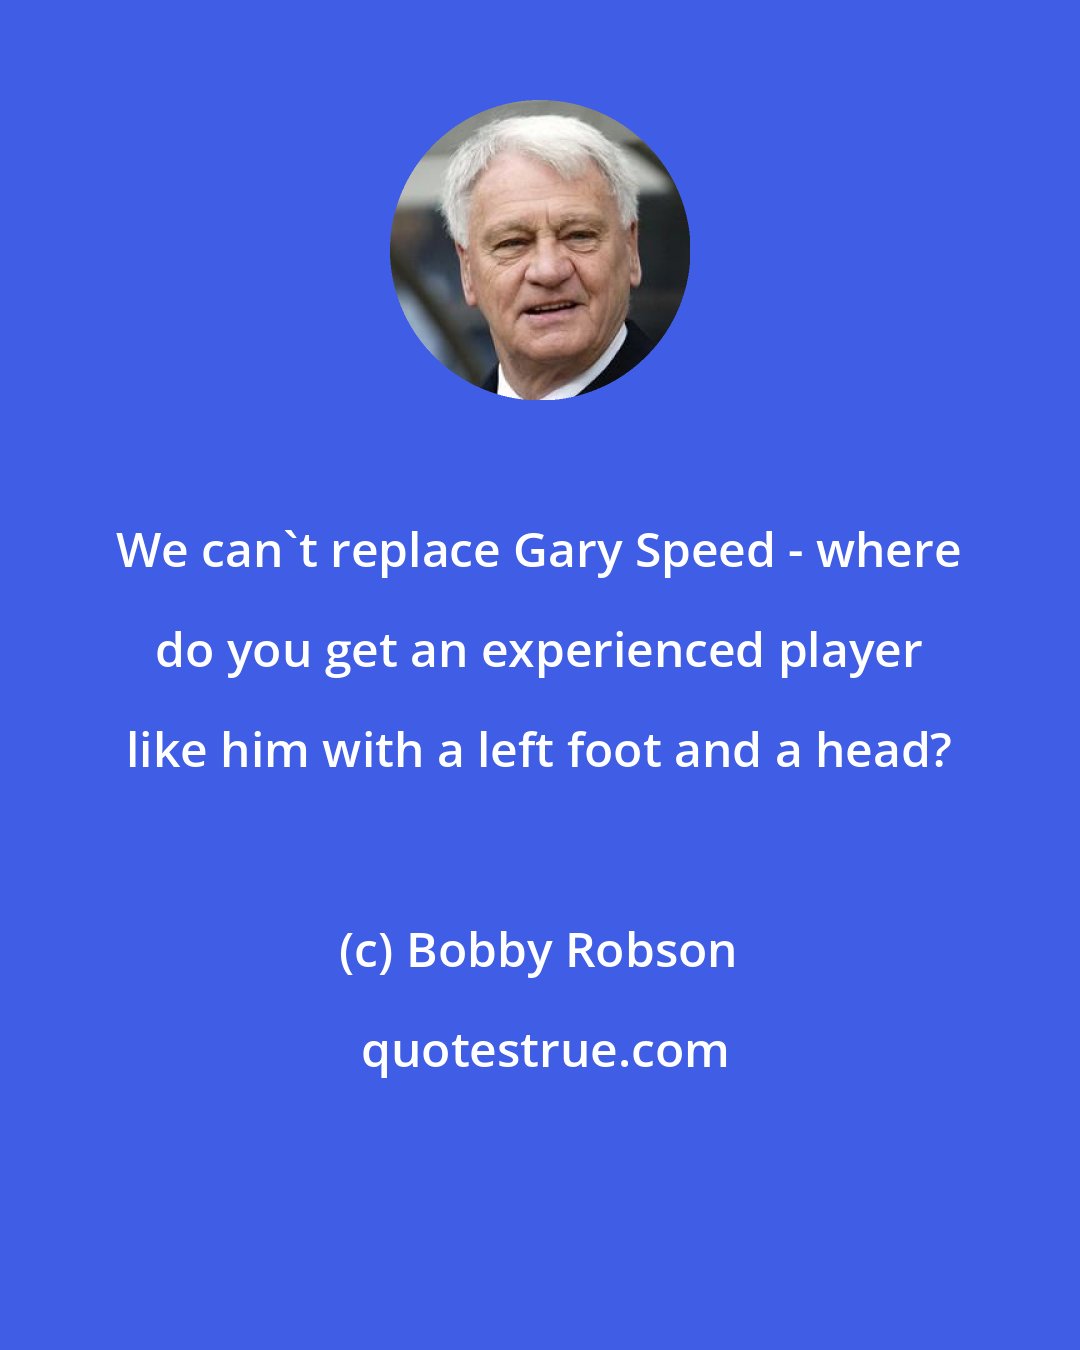 Bobby Robson: We can't replace Gary Speed - where do you get an experienced player like him with a left foot and a head?